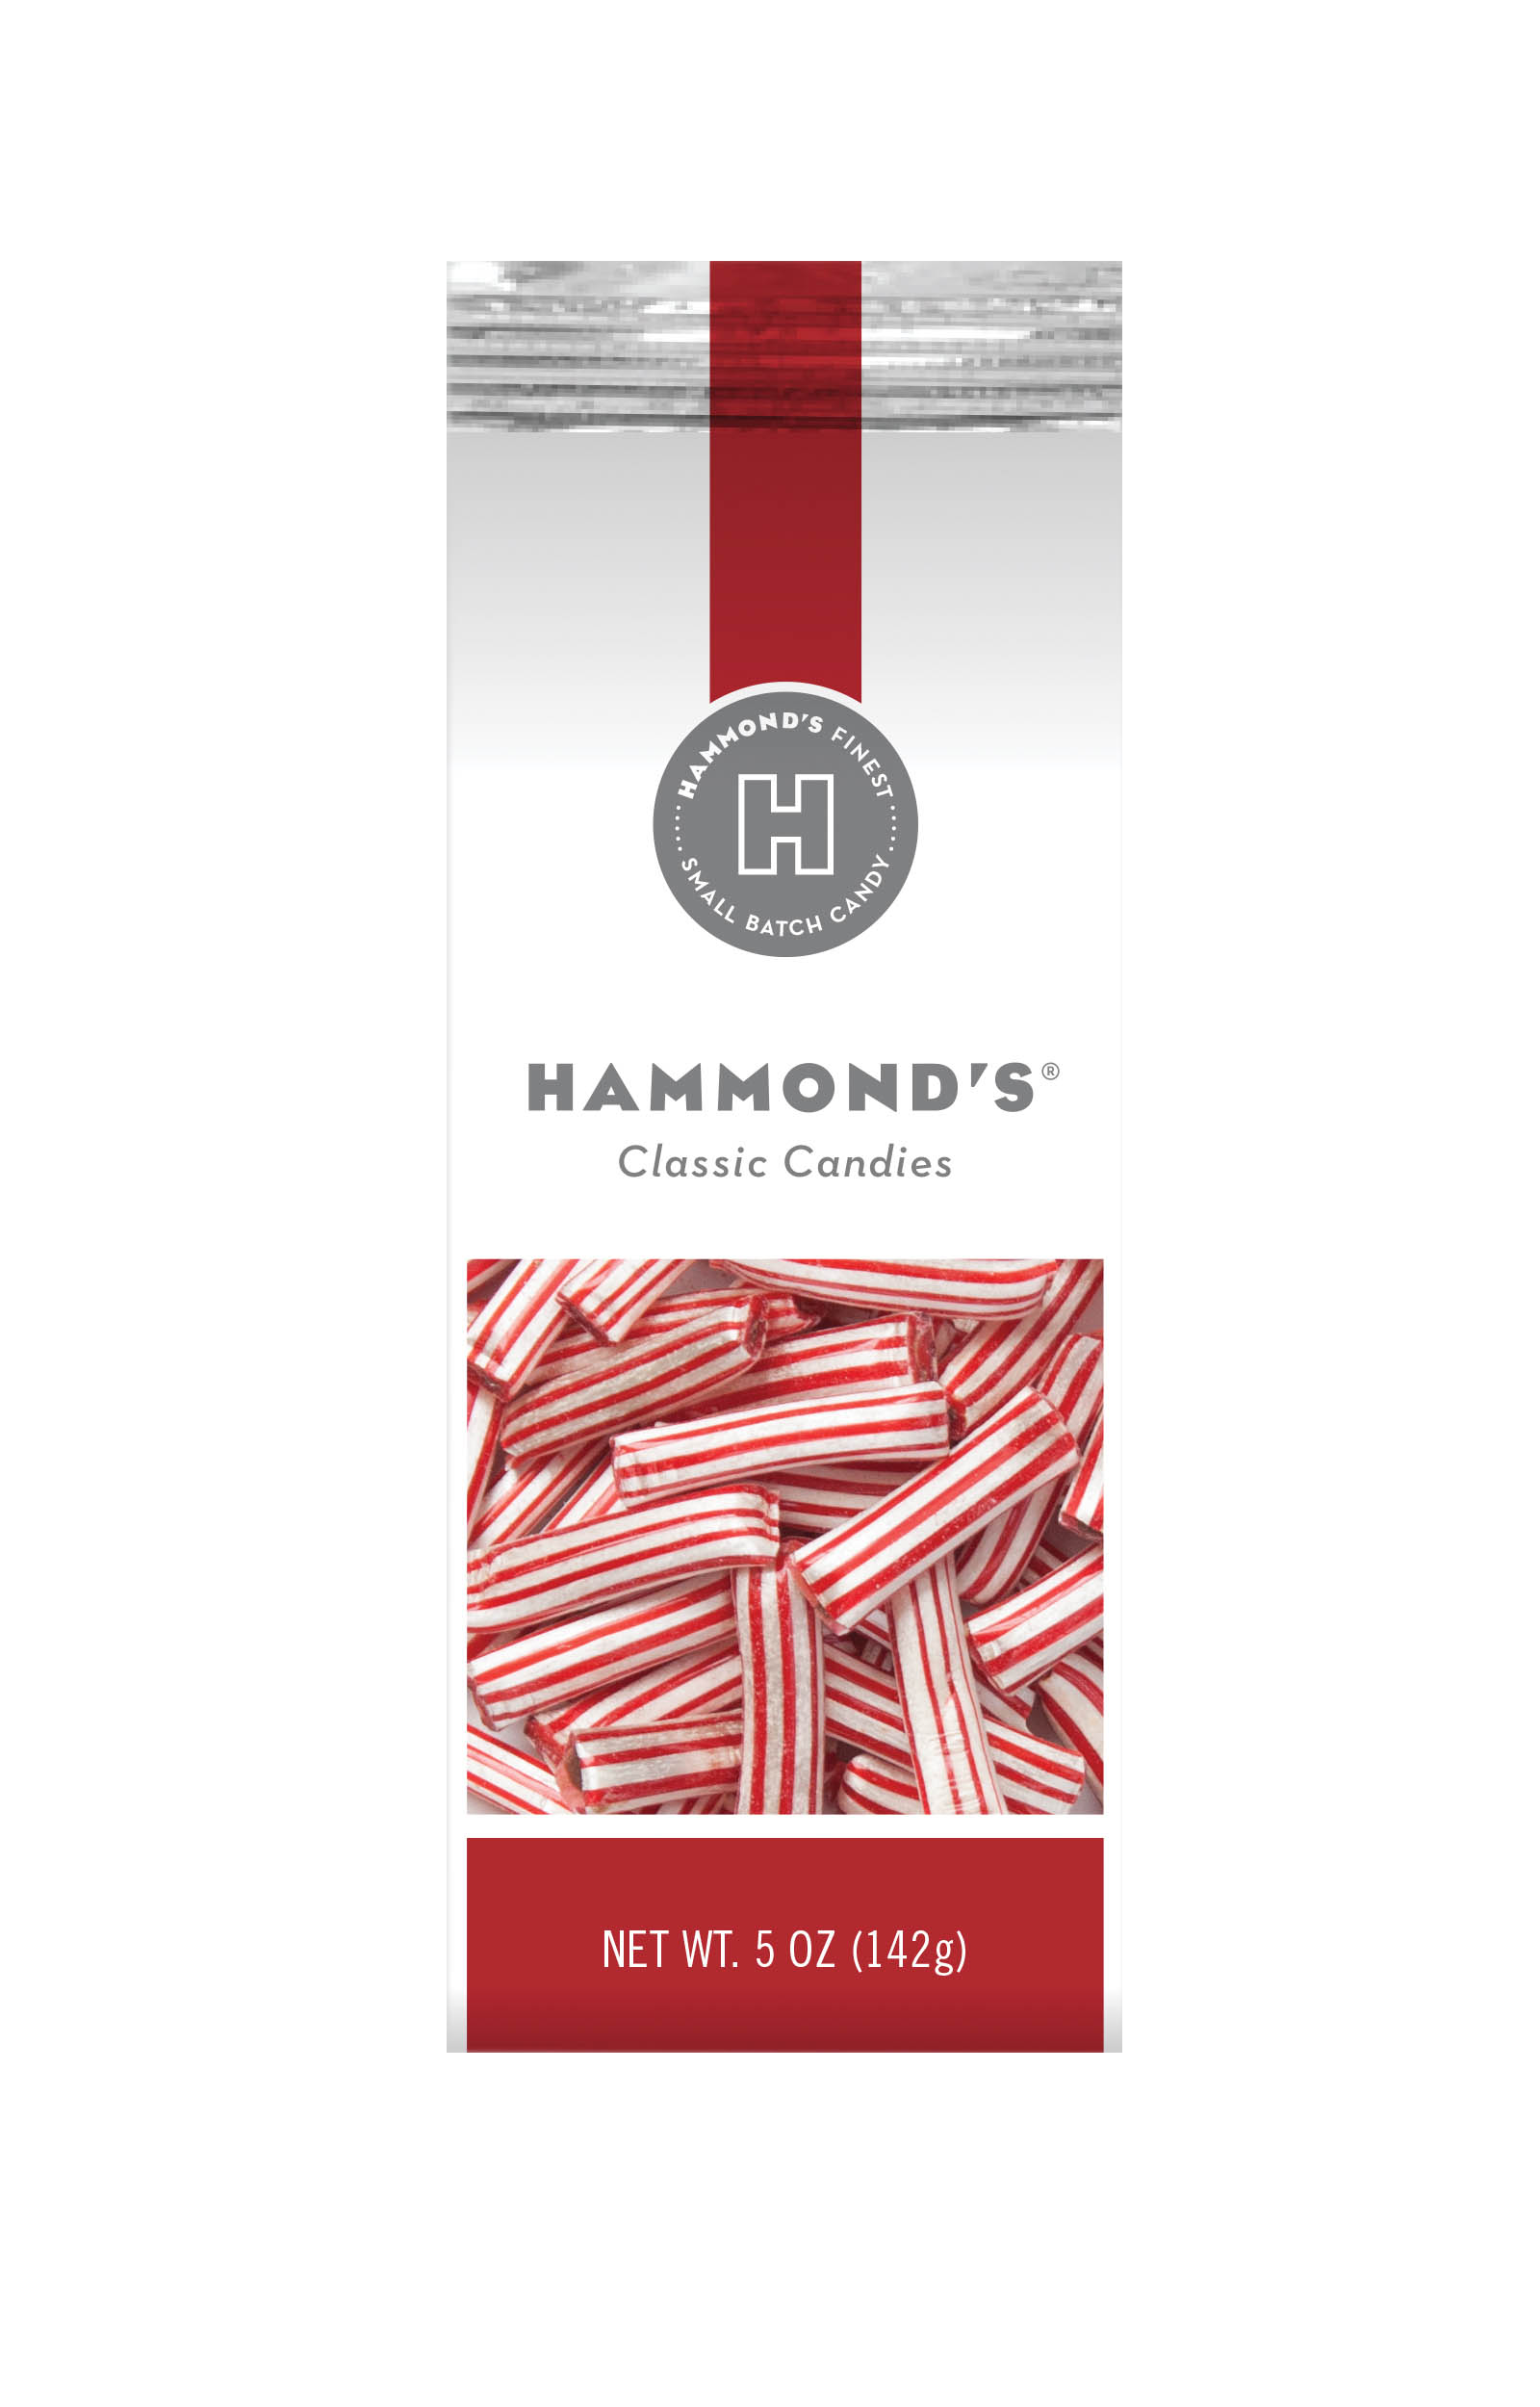 Peppermint Creme Candy Straws, 1 Pound 8 Ounce Bag - The Vermont Country Store